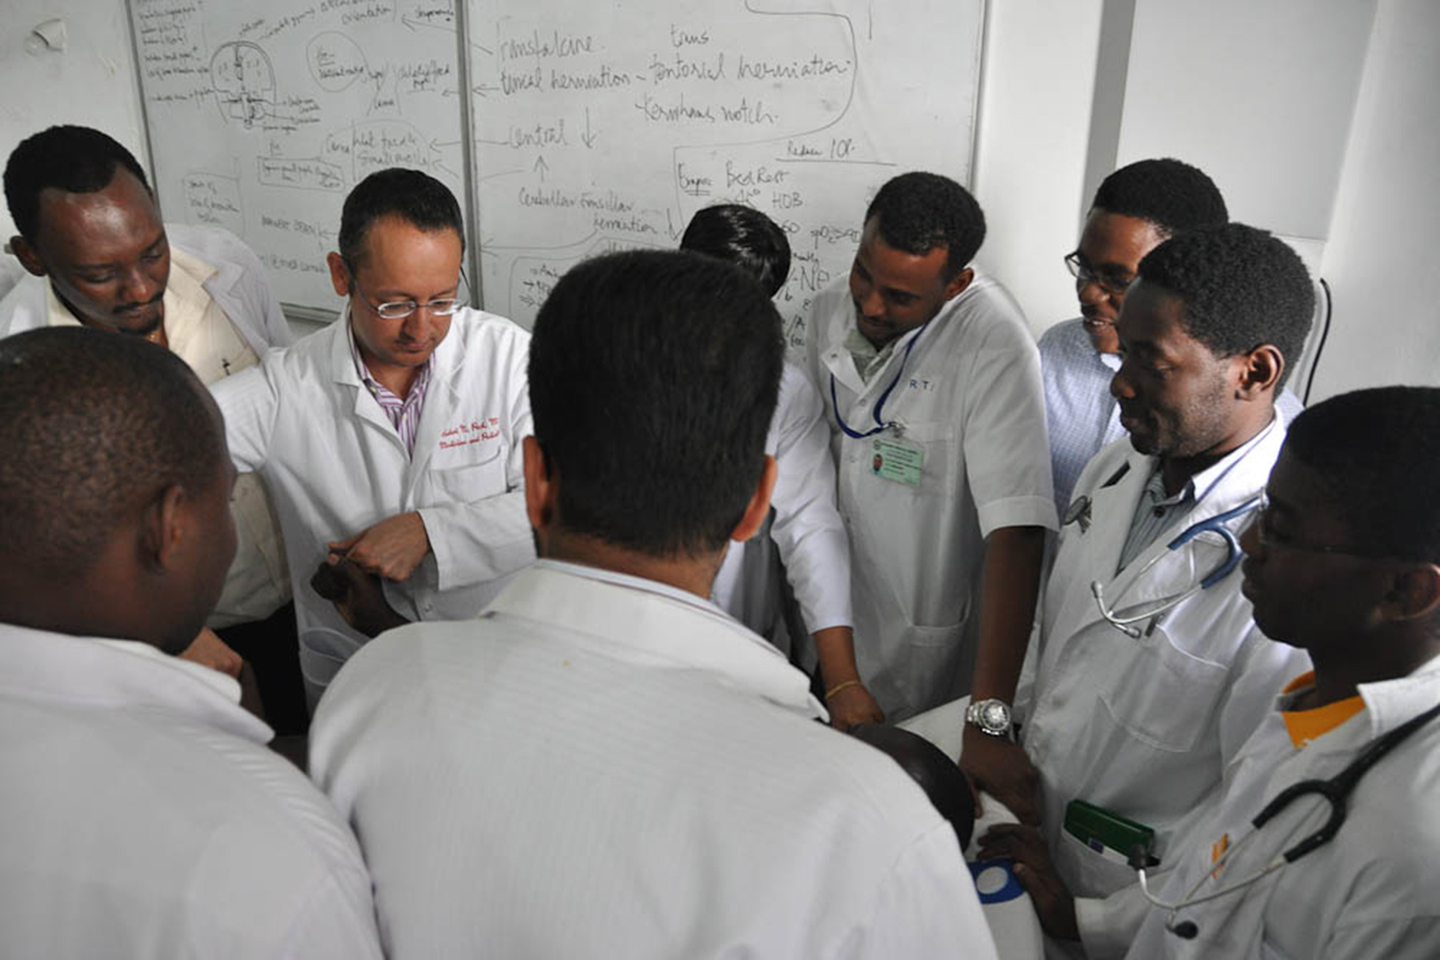 Dr. Hal Mangat conducts rounds with residents at Bugando Medical Centre during a visit in 2012 Photos provided